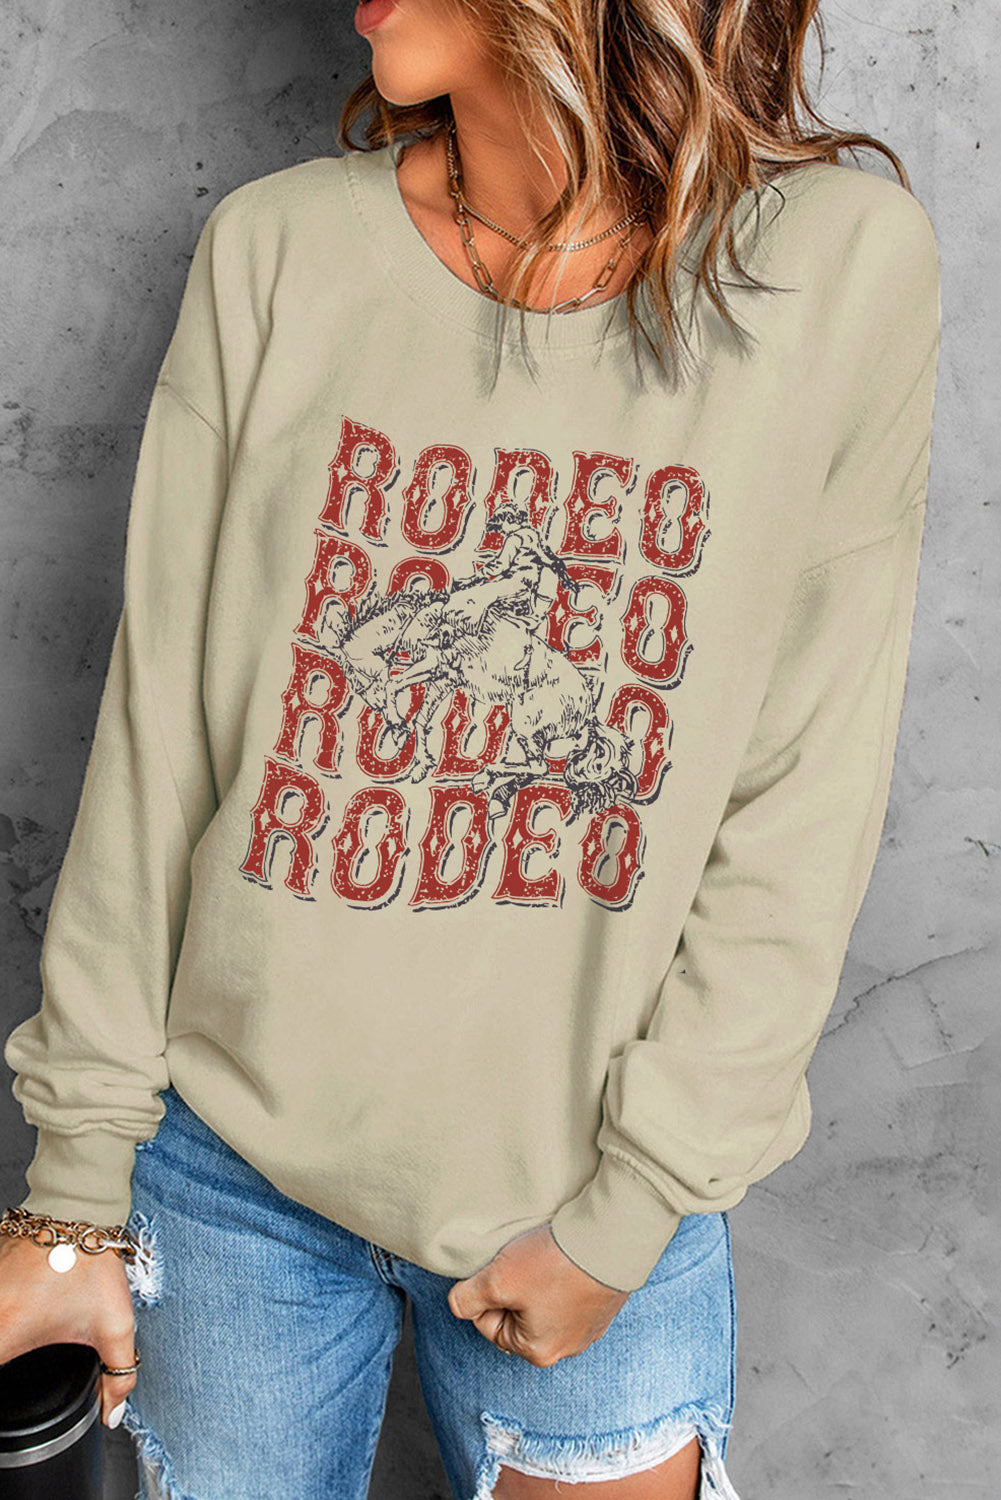 POSHOOT  fall outfits    Round Neck Dropped Shoulder RODEO Graphic Sweatshirt